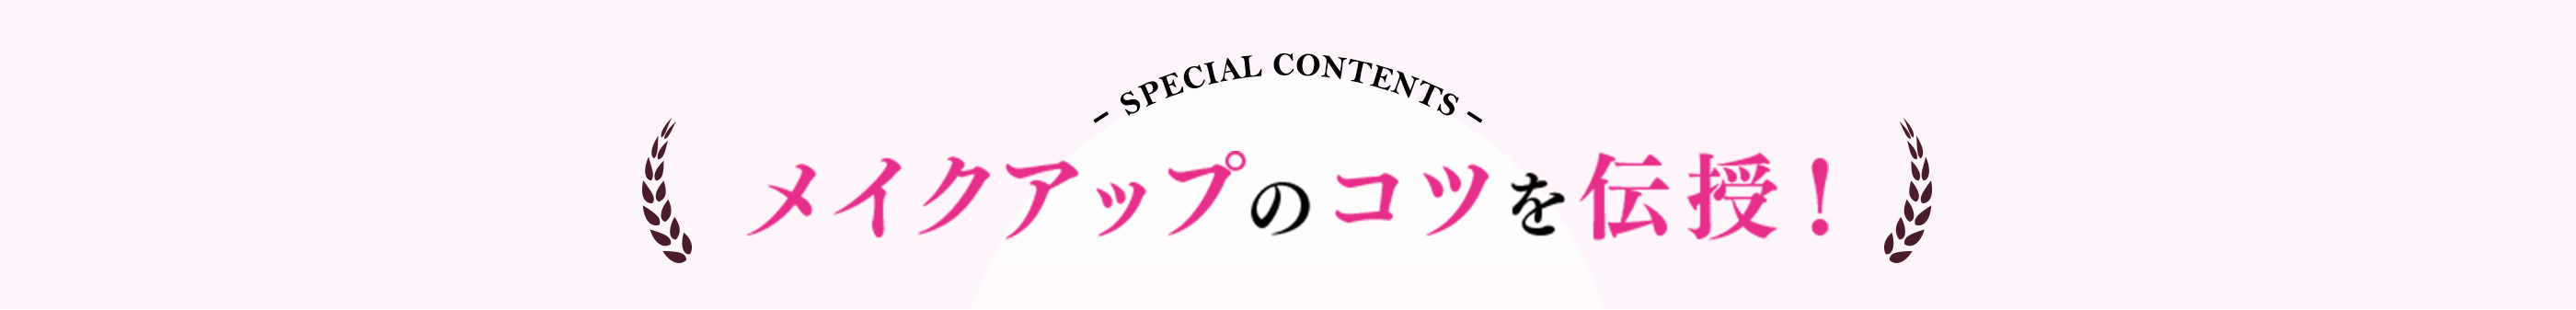 SPECIAL CONTENTS メイクアップのコツを伝授